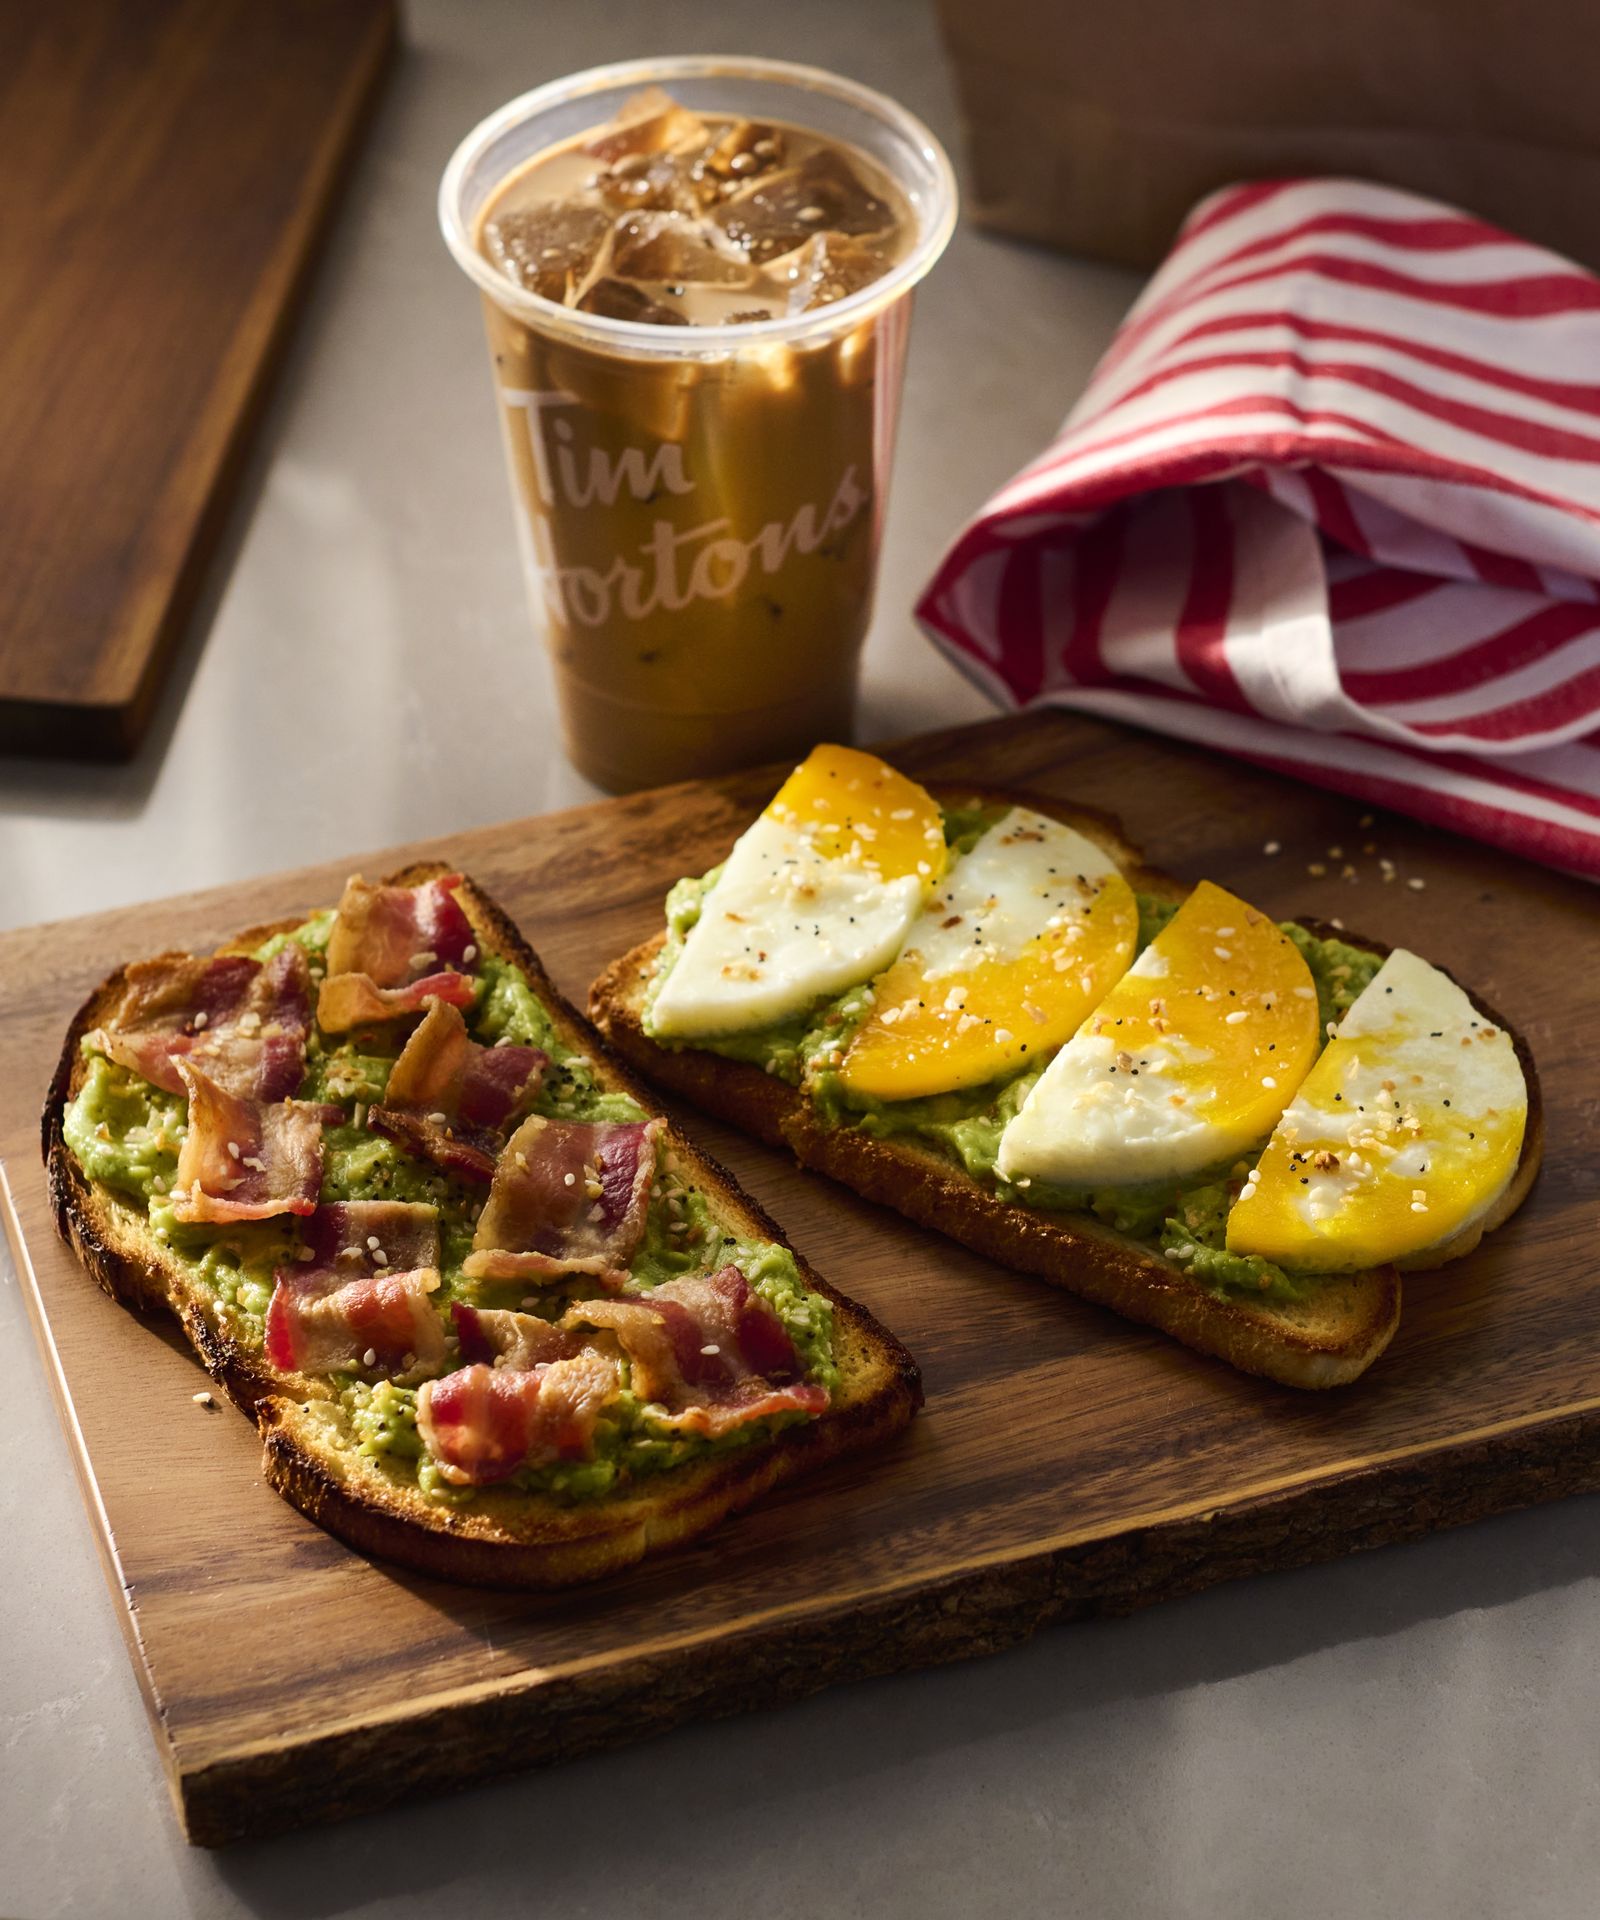 Tim Hortons Now Offering New Flavorful Avocado Options